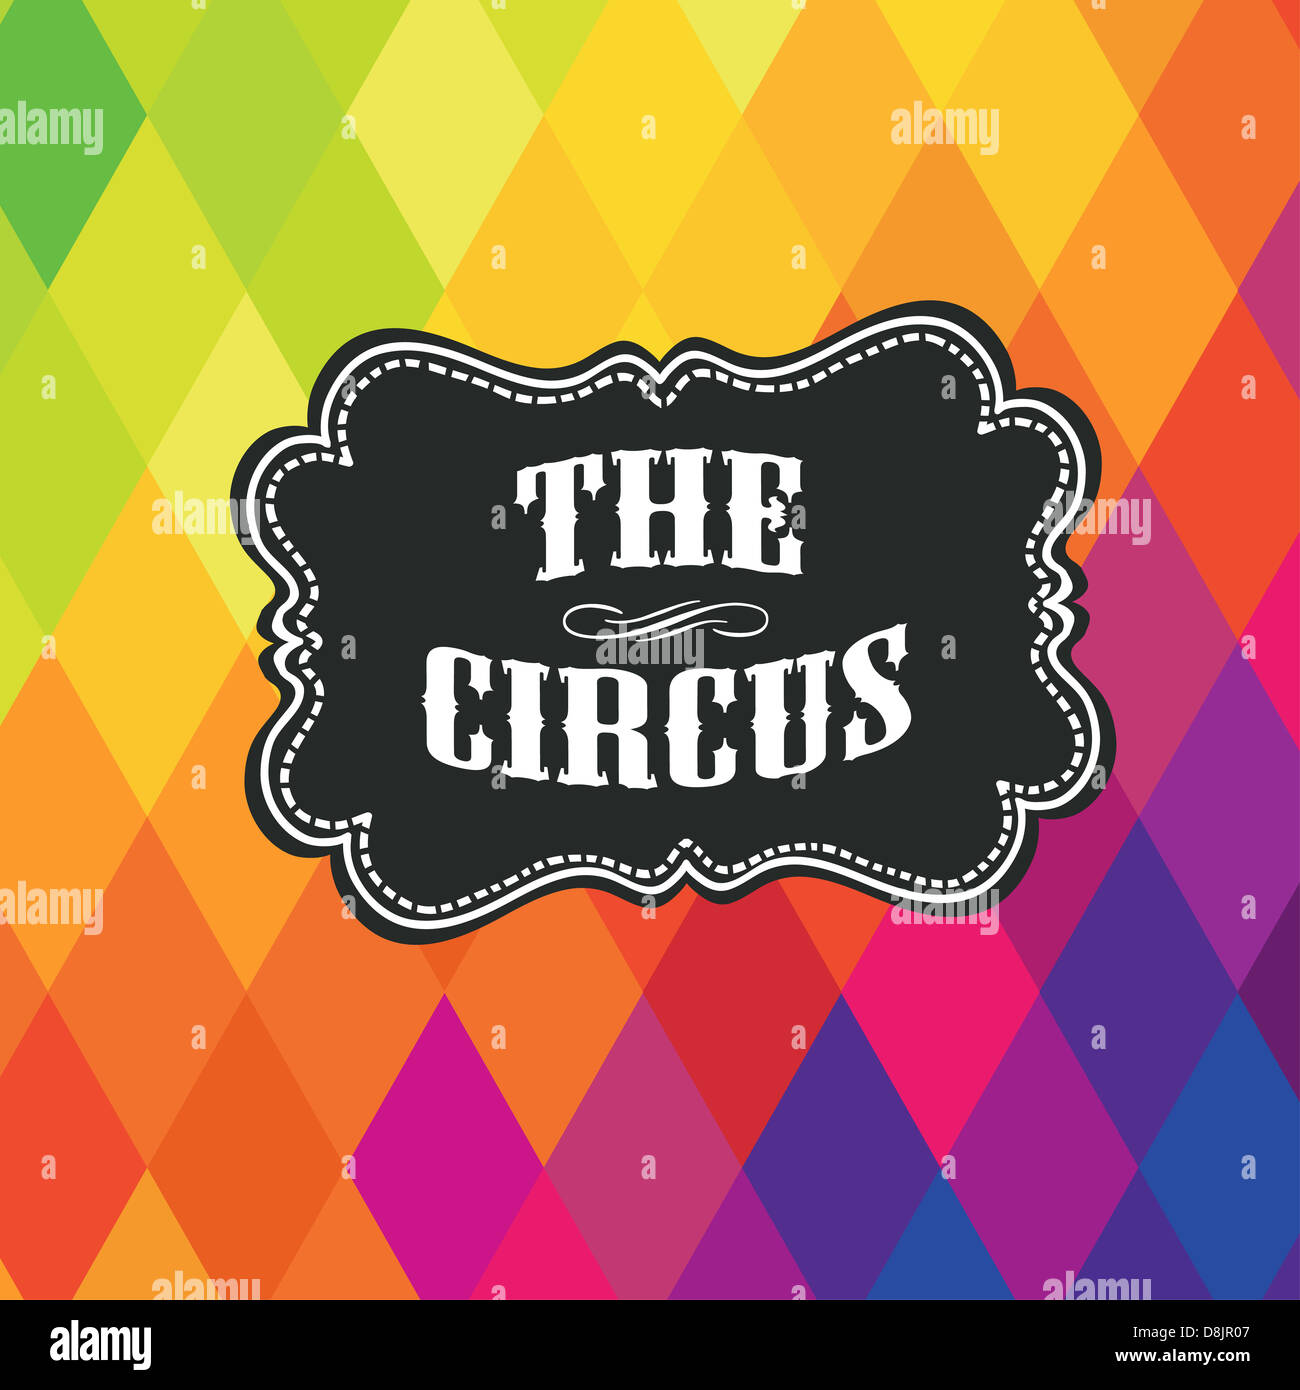 Circus label on colored rhombus background Stock Photo